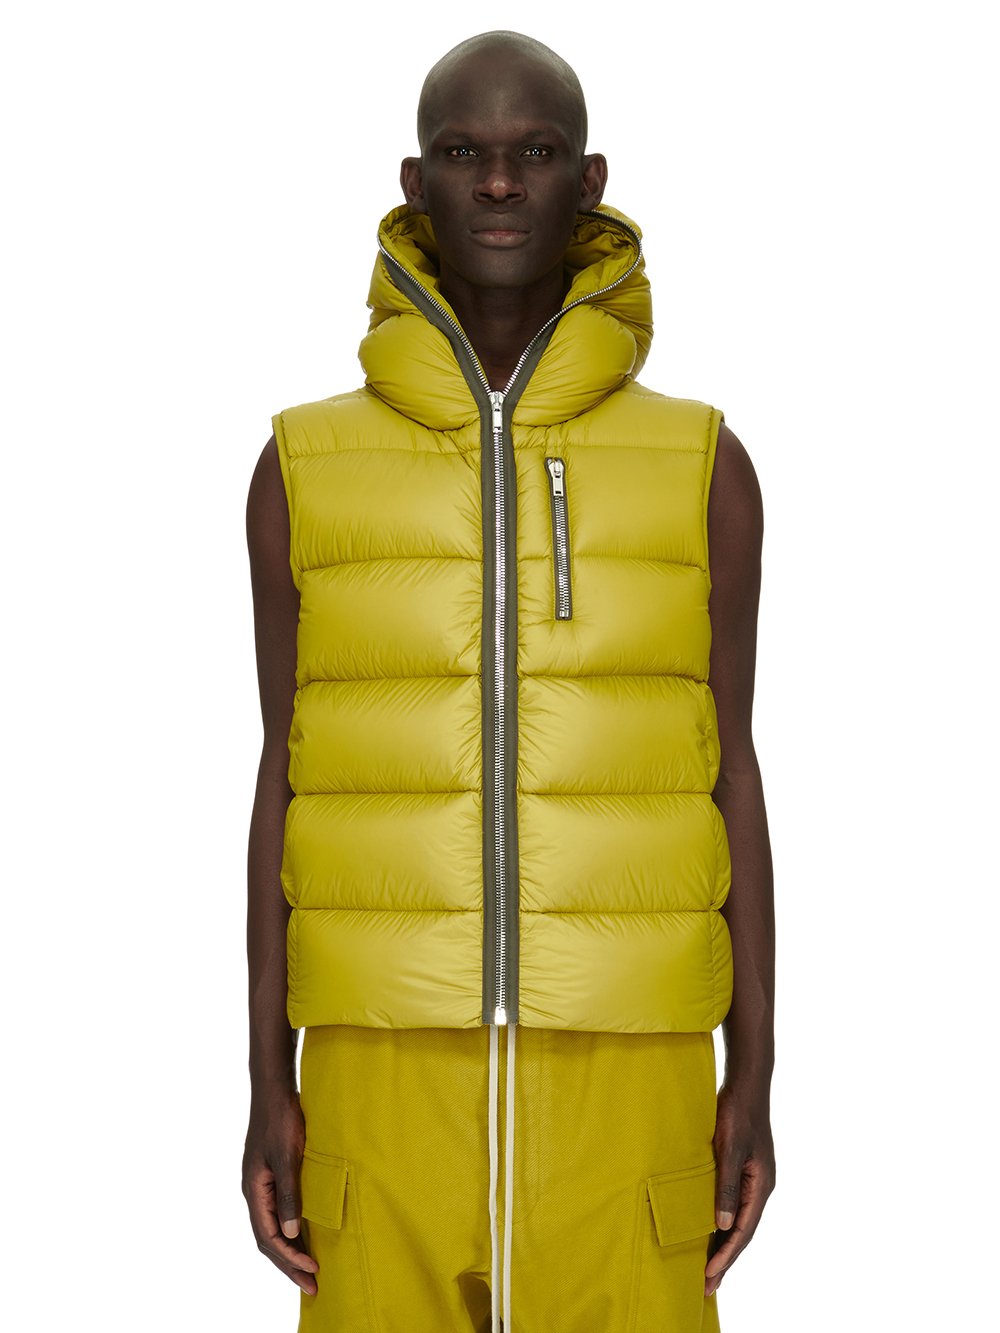 RICK OWENS FW23 LUXOR SEALED VEST IN ACID YELLOW RECYCLED NYLON